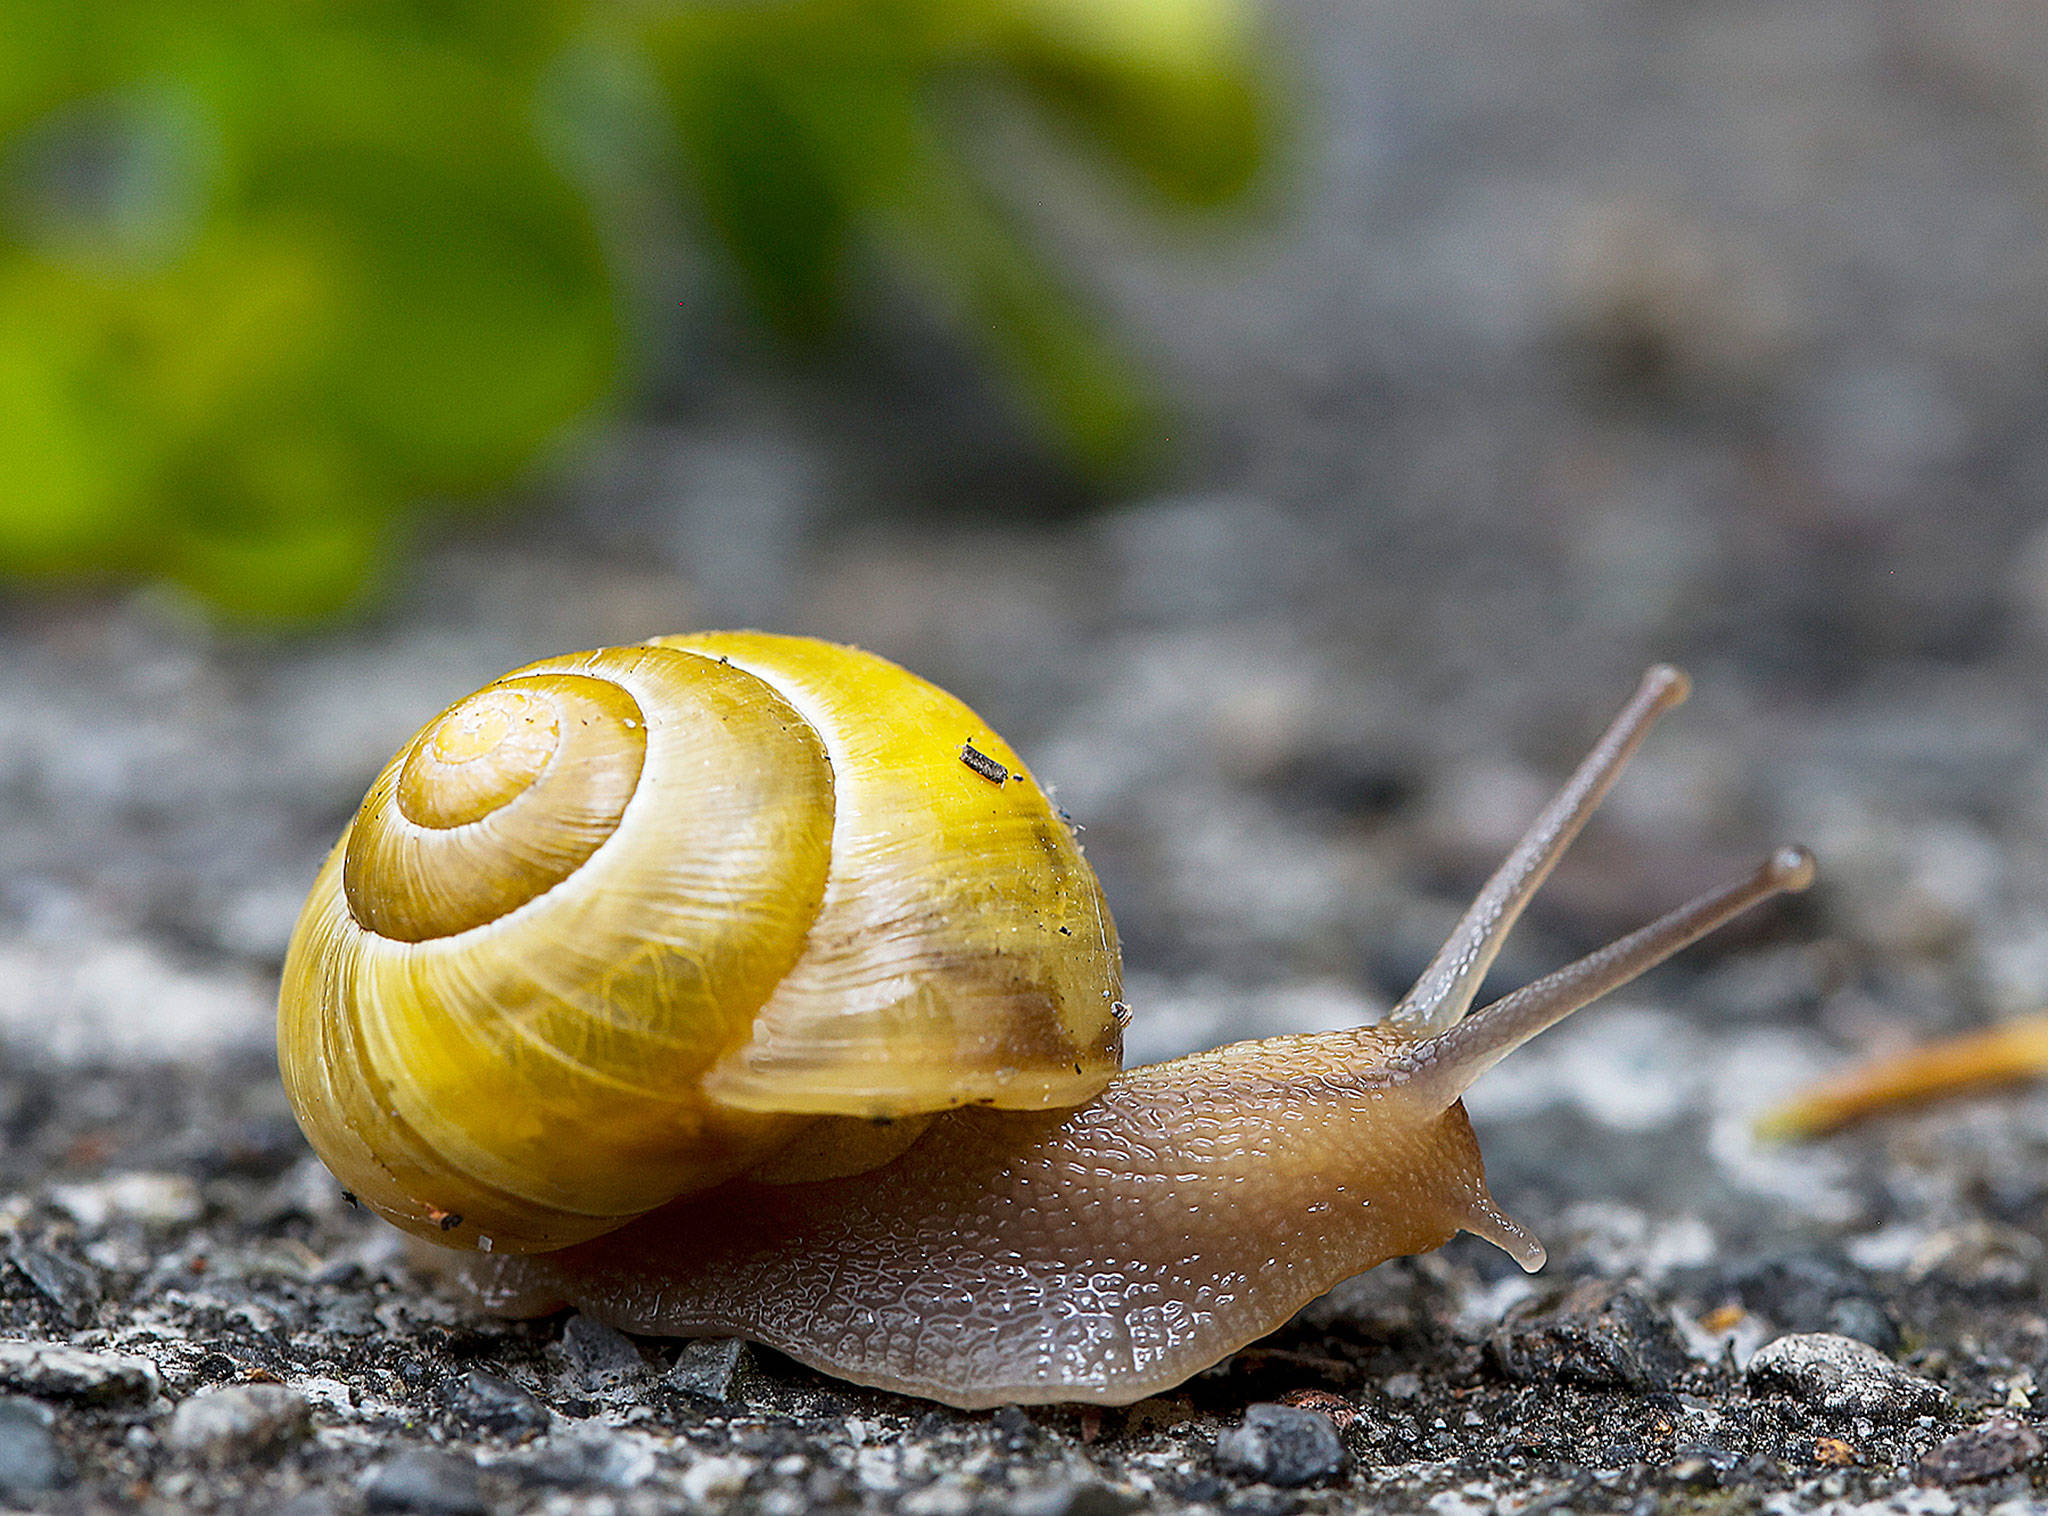 The next time you go on a hike, take it at a snail’s pace. (Dan Bates/Herald file)